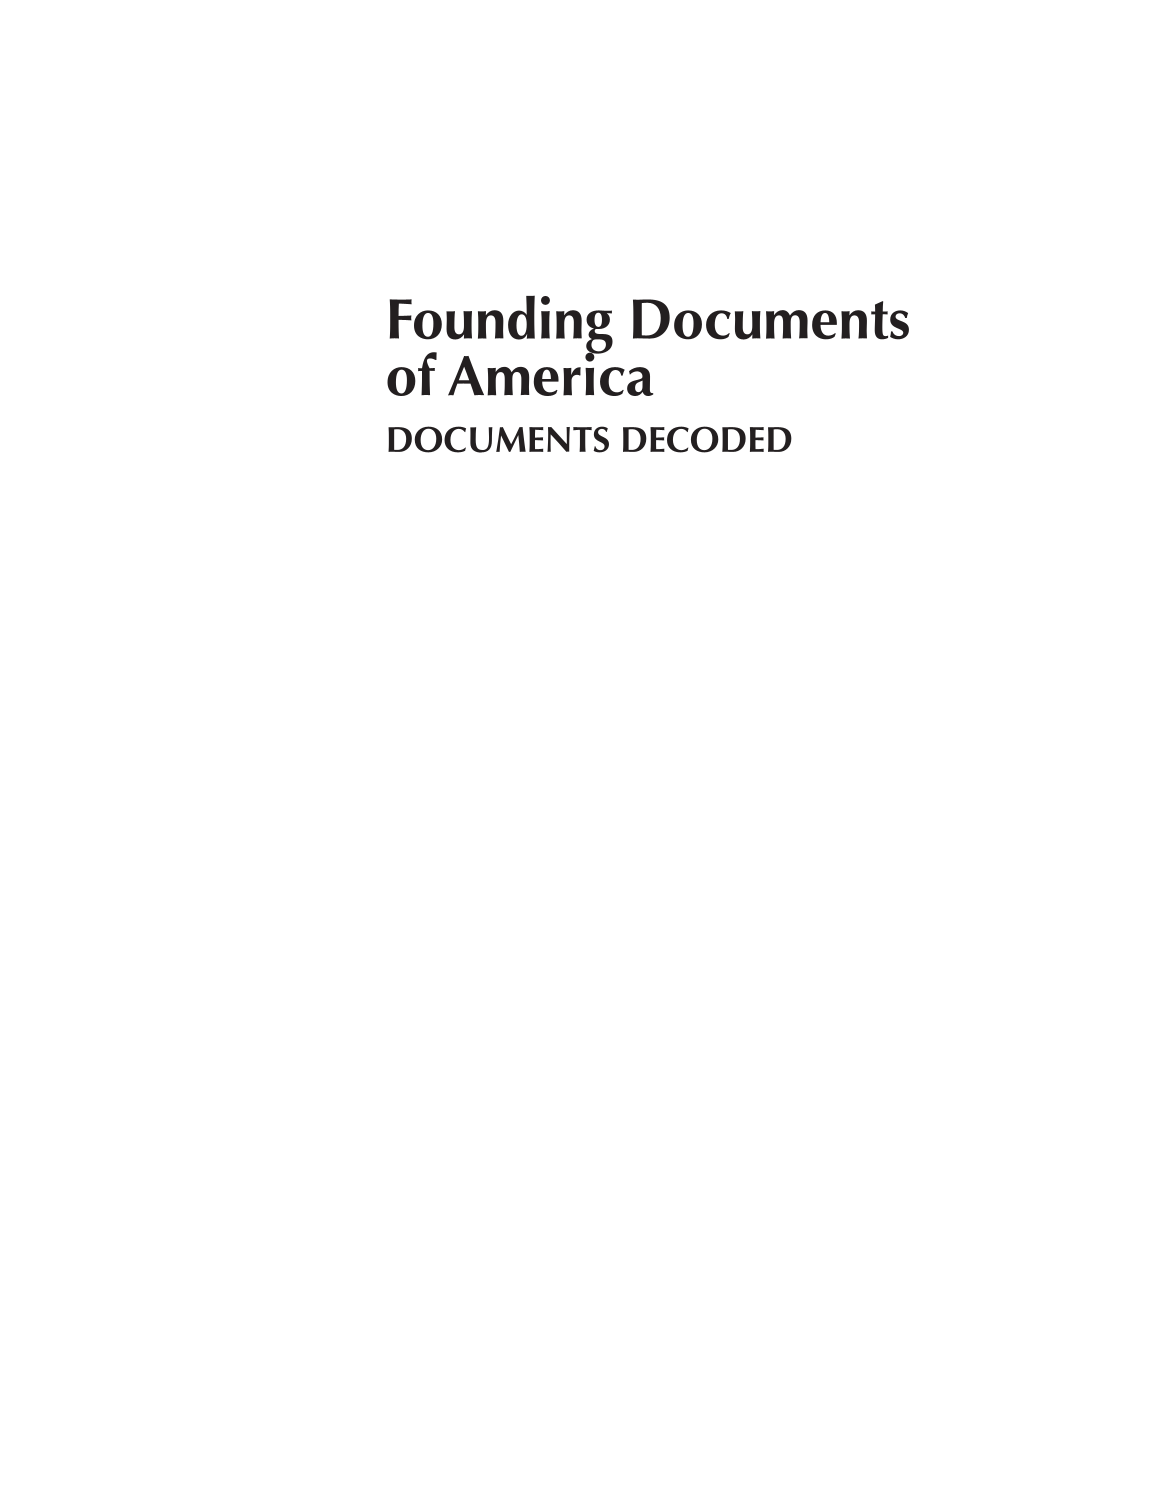 Founding Documents of America: Documents Decoded page i